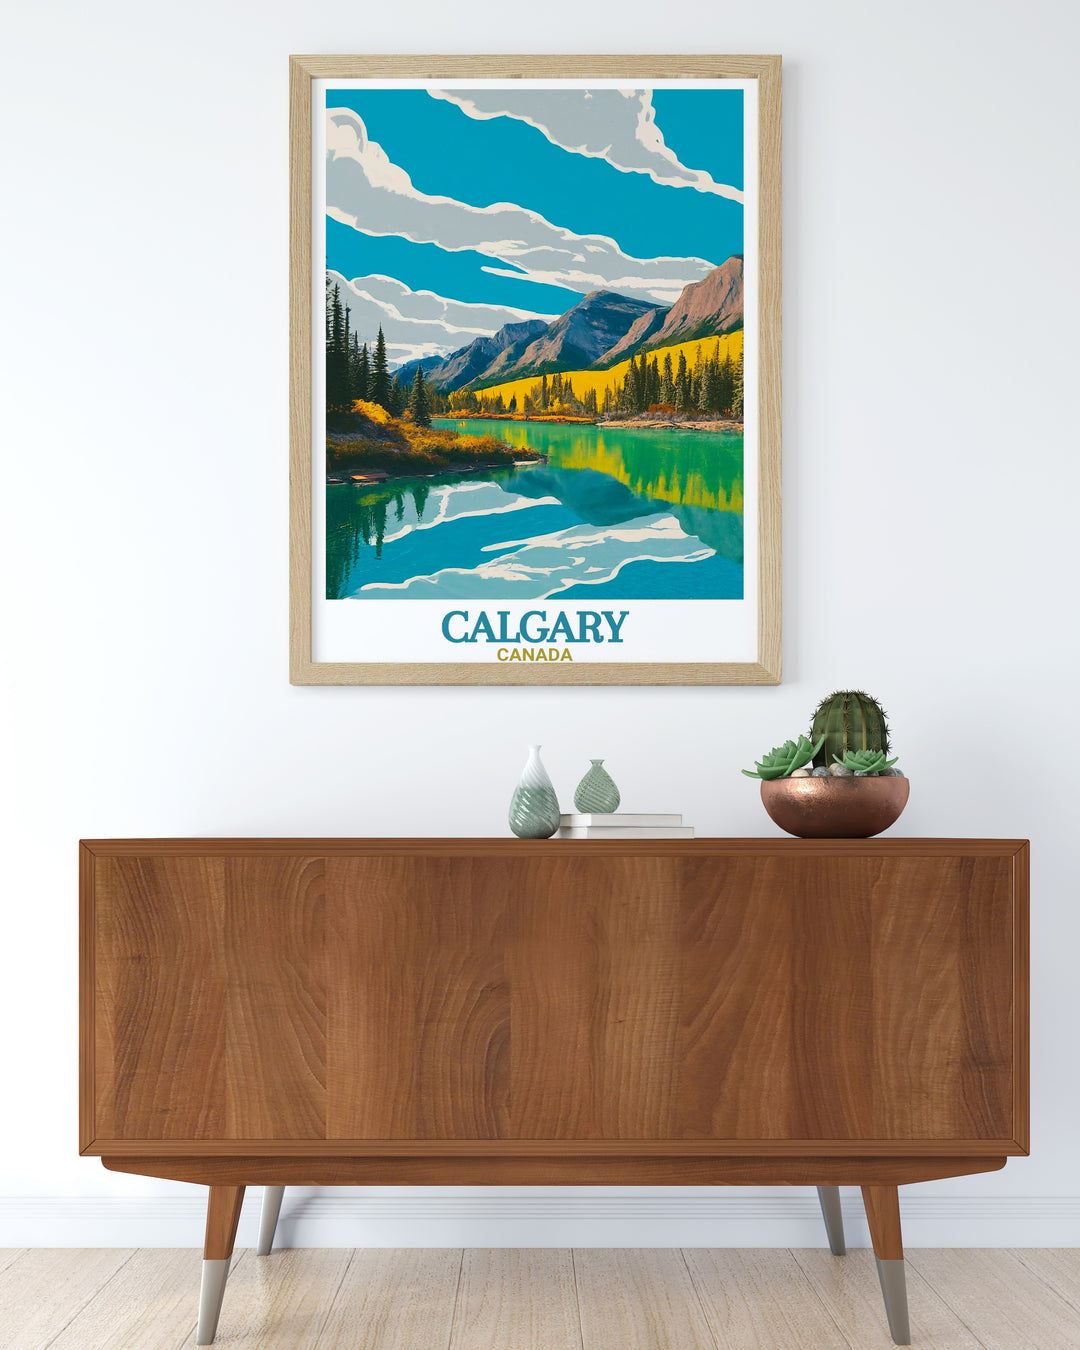 Fish Creek Provincial Park poster highlighting the parks lush scenery and tranquil atmosphere. Ideal for nature lovers this Canada decor piece is a beautiful reminder of Calgarys natural oasis and makes a great gift for any occasion.